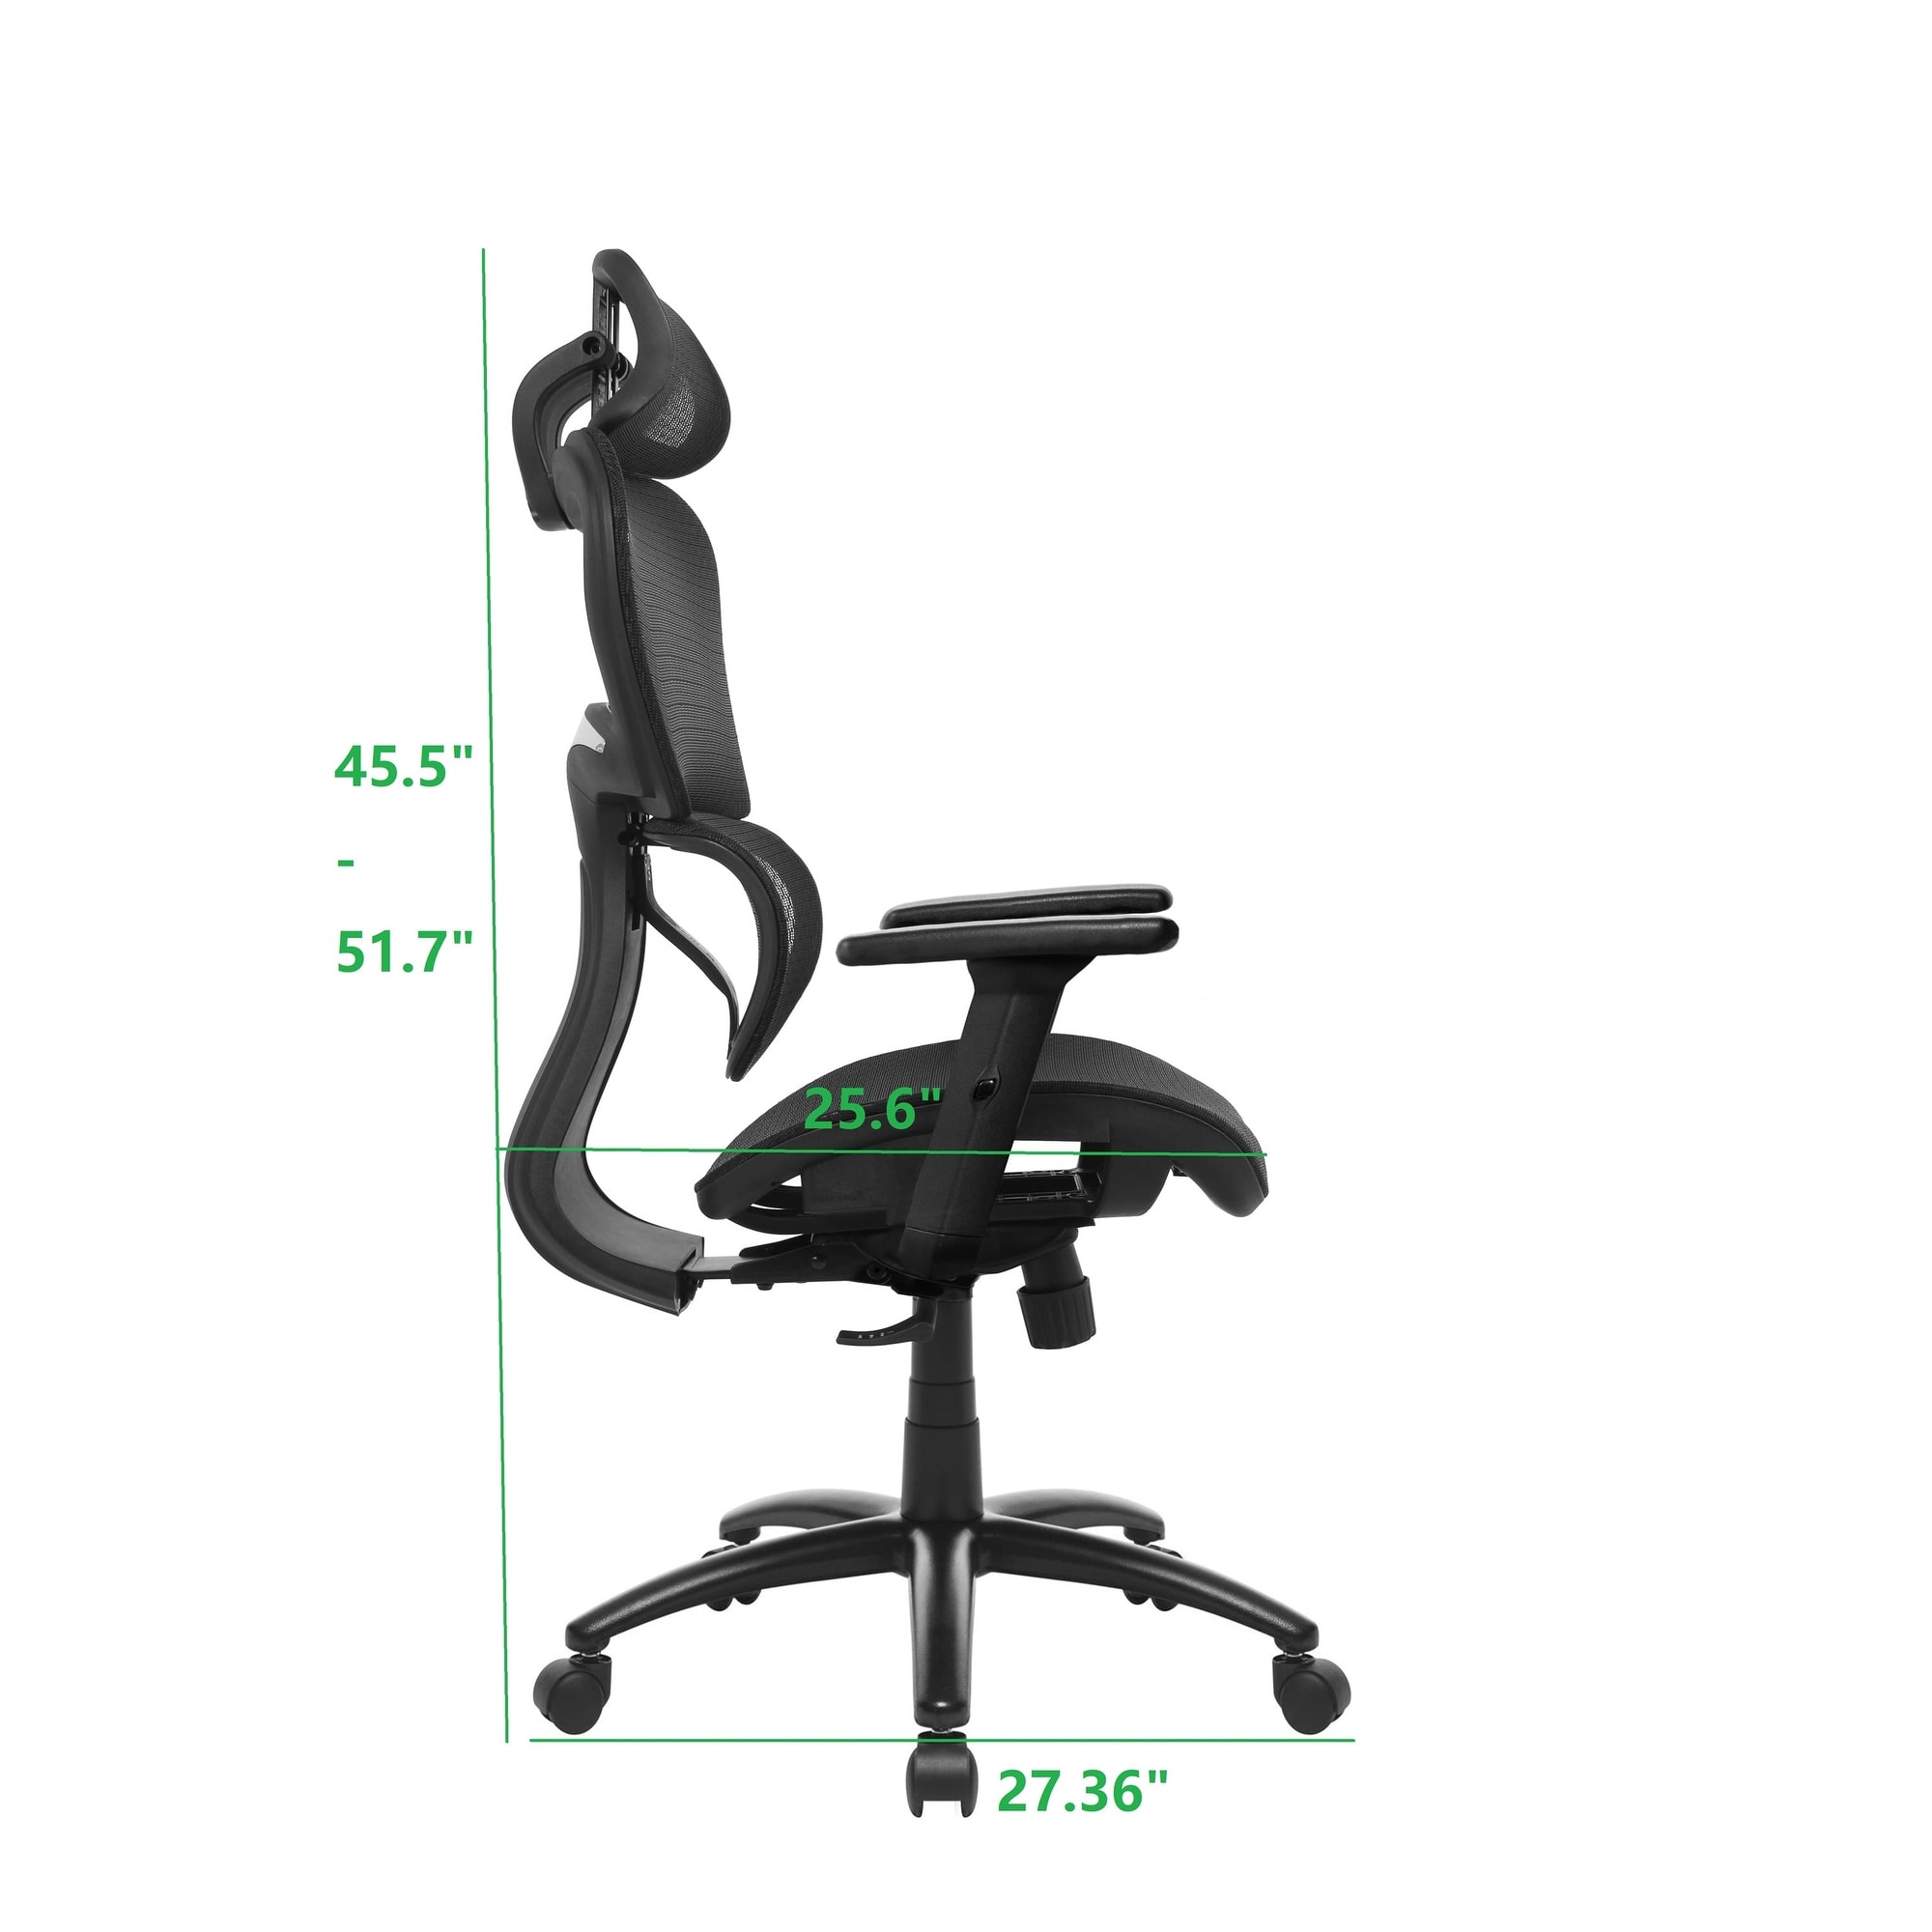 https://ak1.ostkcdn.com/images/products/is/images/direct/6a601c4c41c20723d91340e6f21c6569577bc79f/Office-Chair-Ergonomic-Mesh-High-Back-Desk-Chair-with-3D-Arms-Deluxe-Computer-Chair-with-Adjustable-Height-And-Tilt.jpg